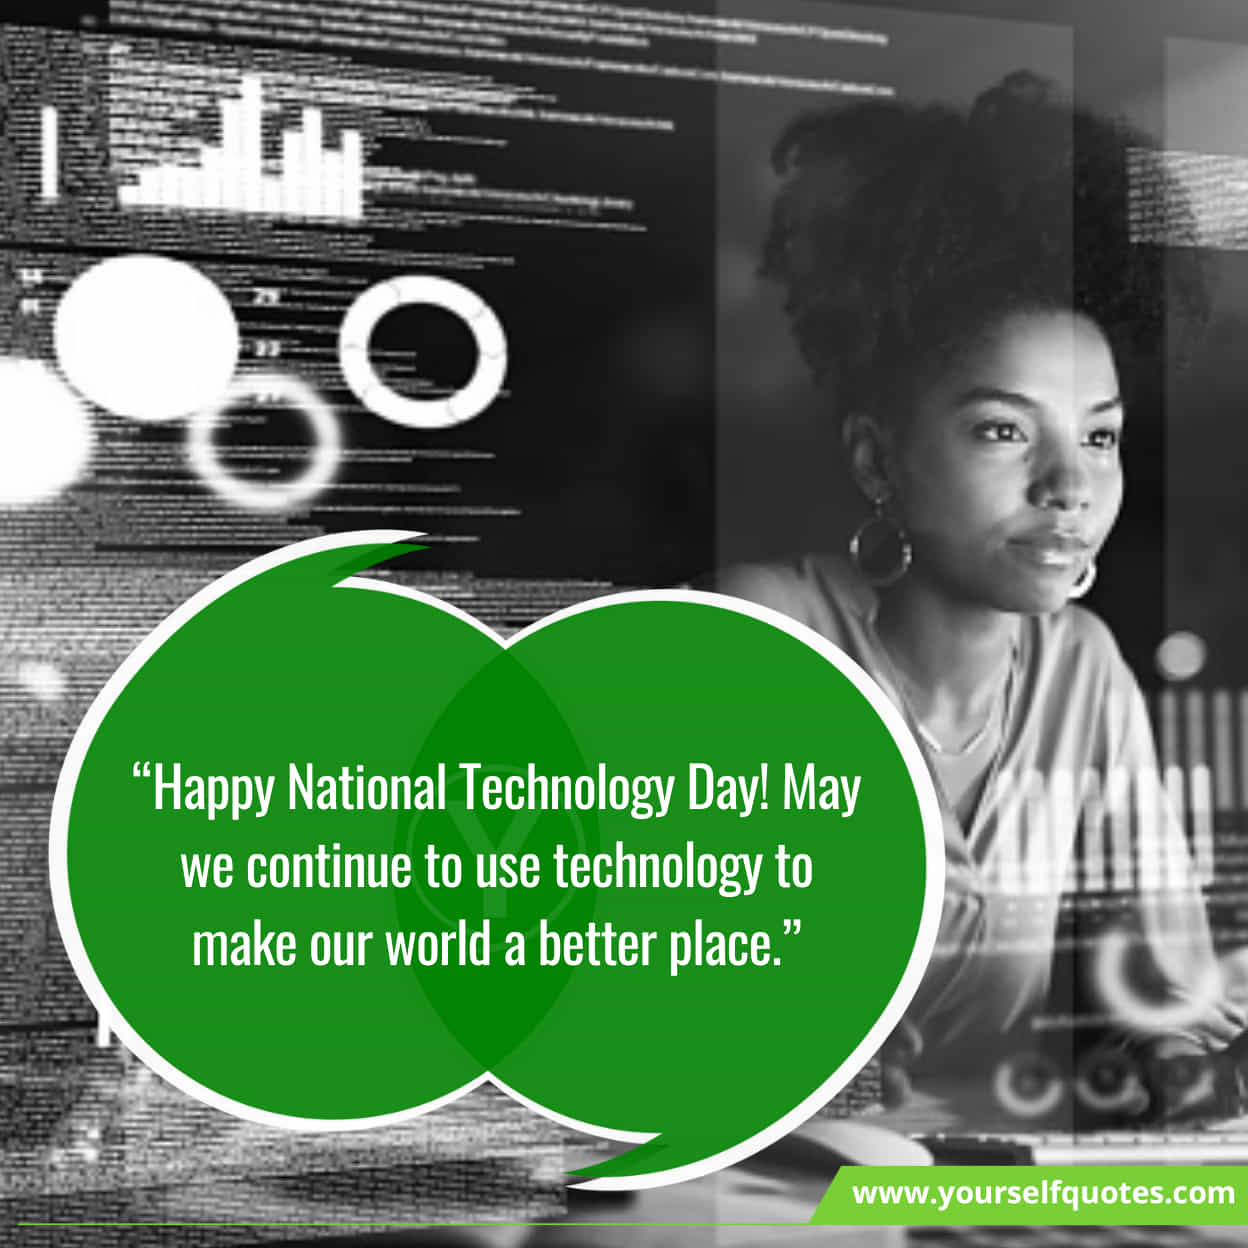 Wishes For National Technology Day